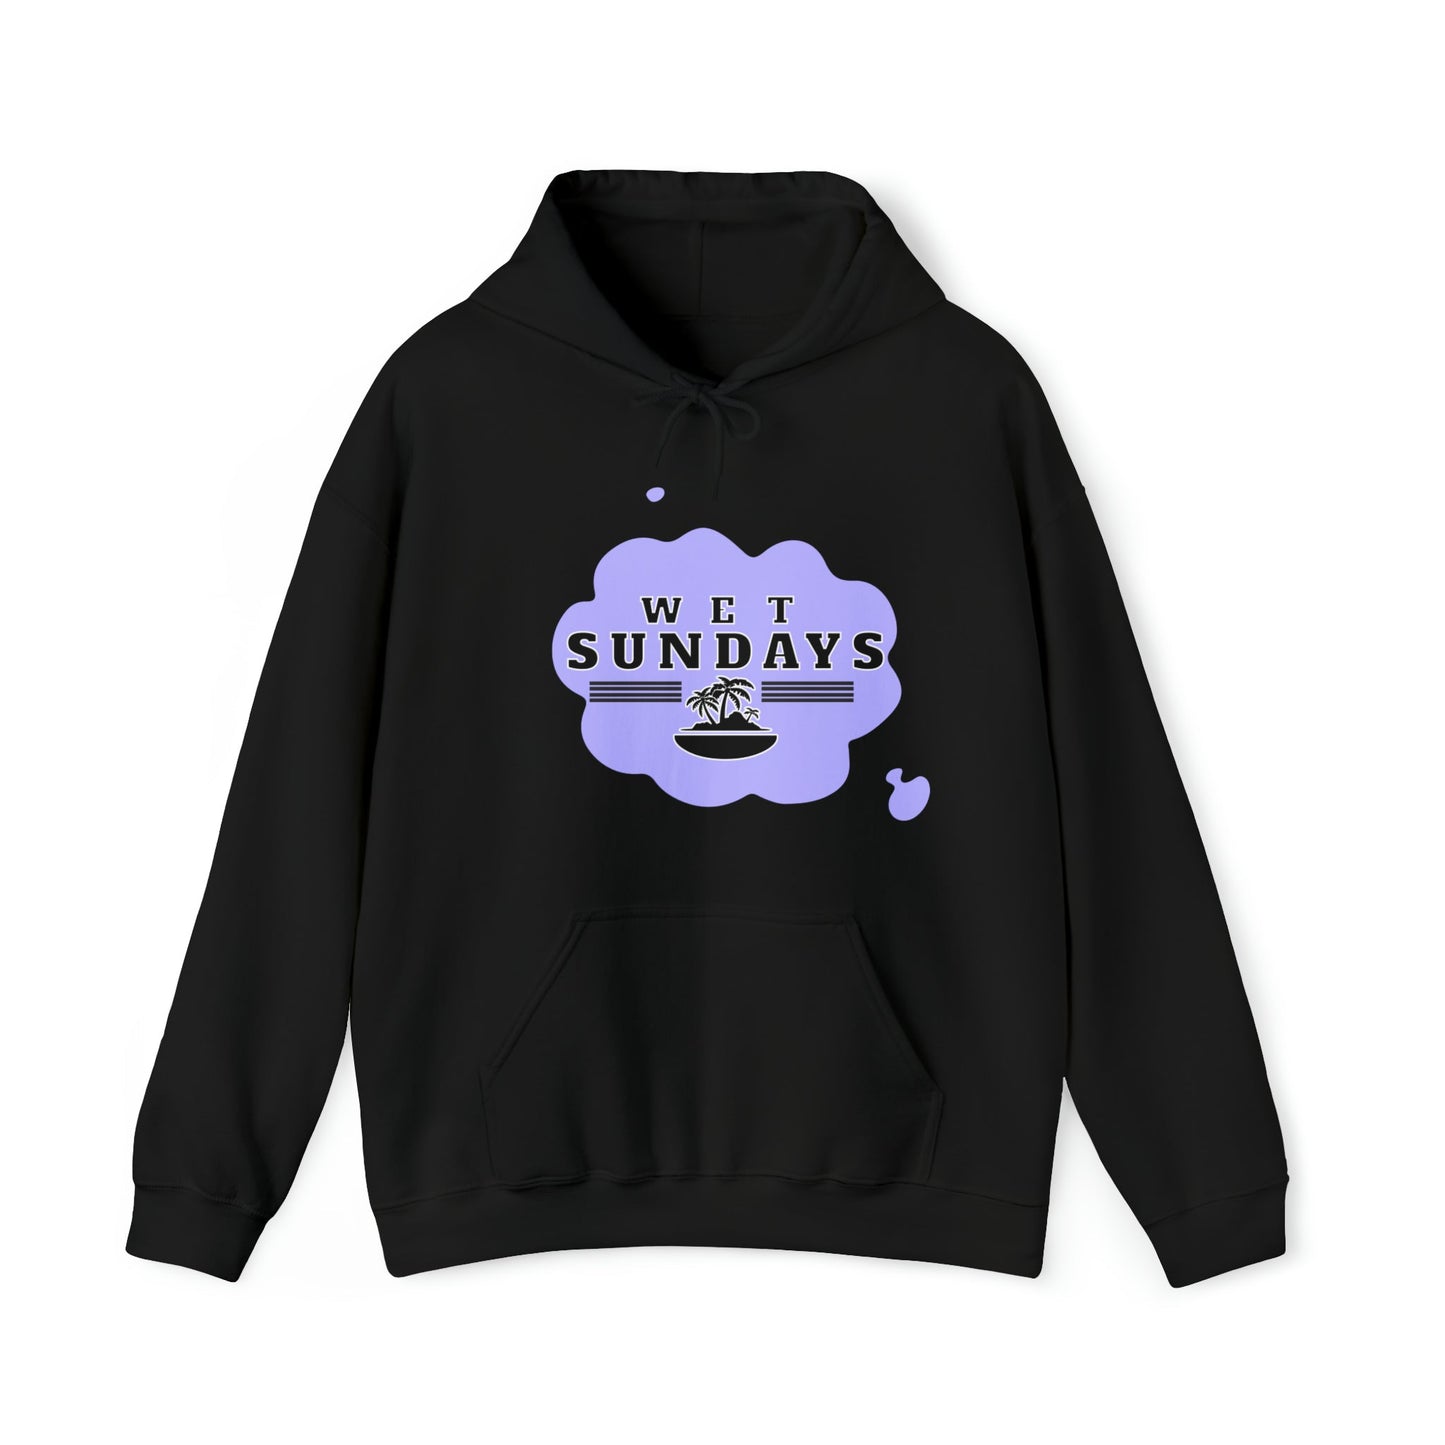 Clouded Thoughts Black Graphic Hoodie - Wet Sundays